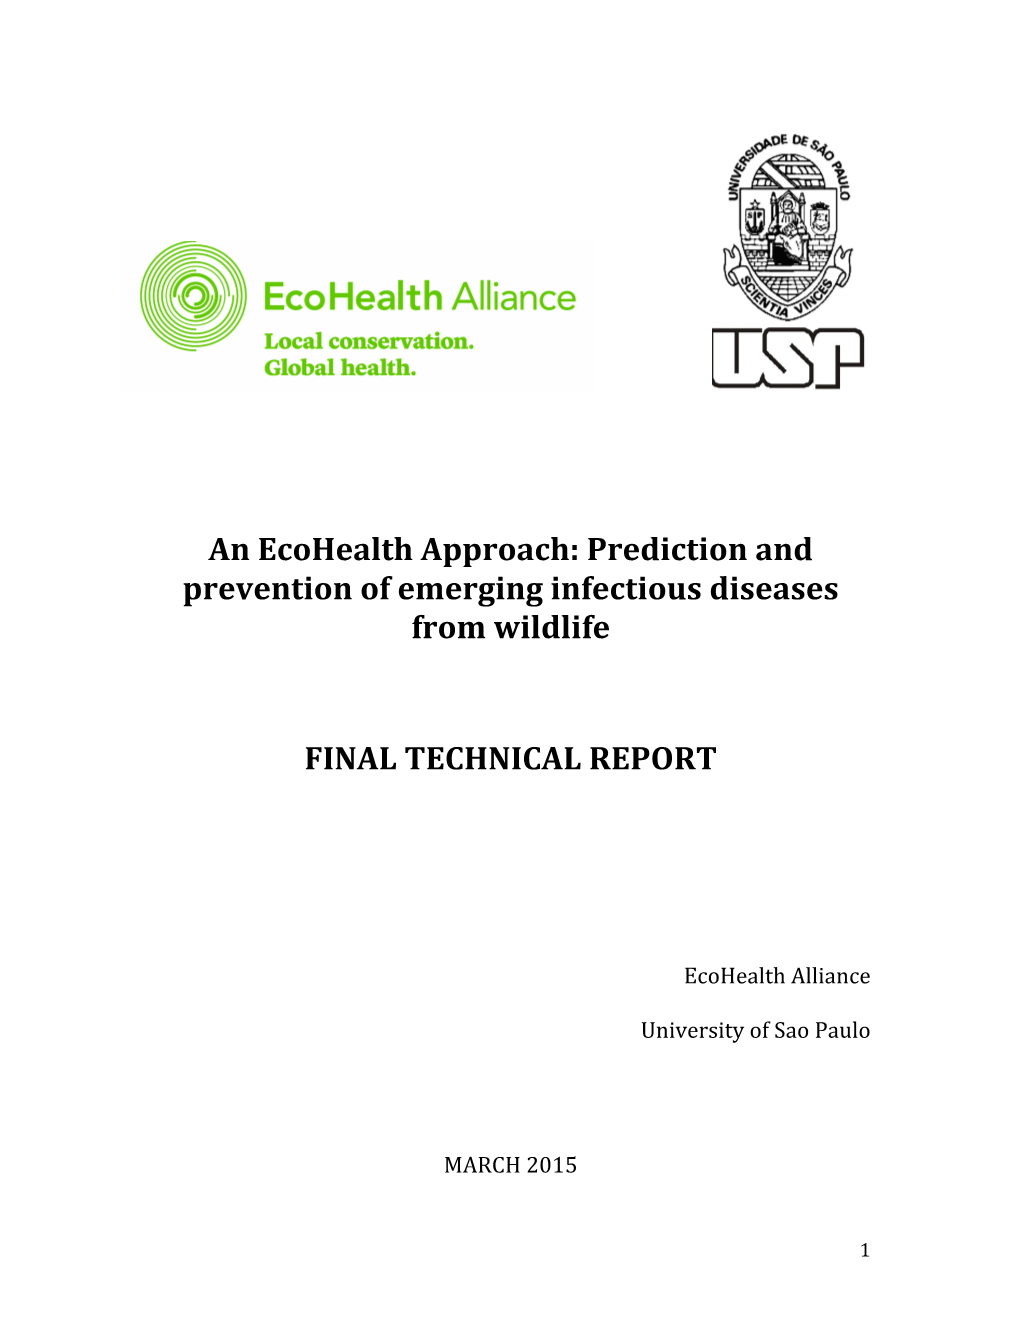 Prediction and Prevention of Emerging Infectious Diseases from Wildlife